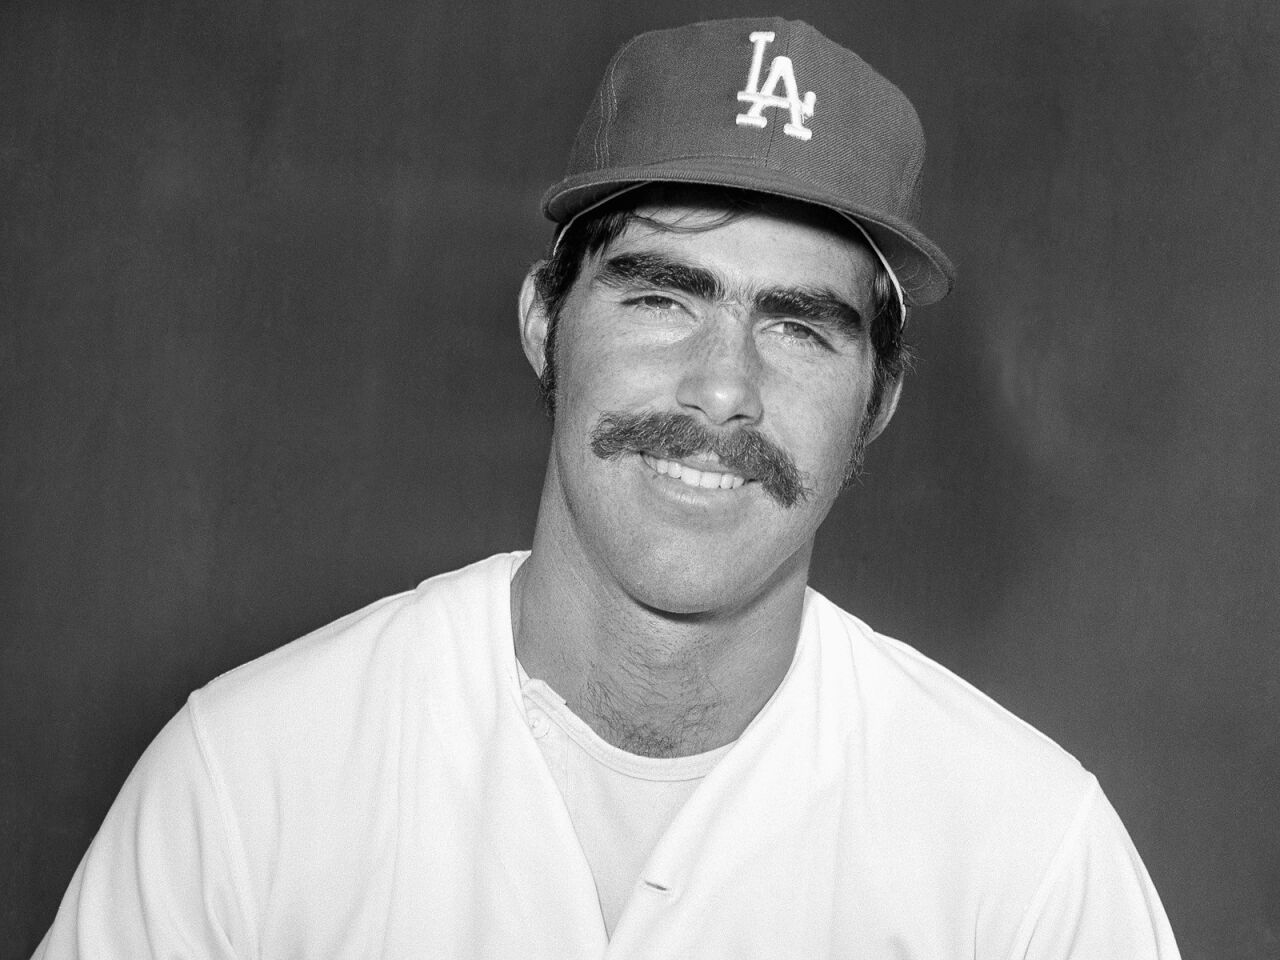 Bill Buckner's 22-year Major League Baseball career started with the Dodgers and included seasons with the Cubs and Red Sox. He had more than 2,700 career hits and won the National League batting title in 1980, but he was best known for an error in the 1986 World Series that allowed the Mets to win Game 6 and extend Boston's championship drought. He was 69.